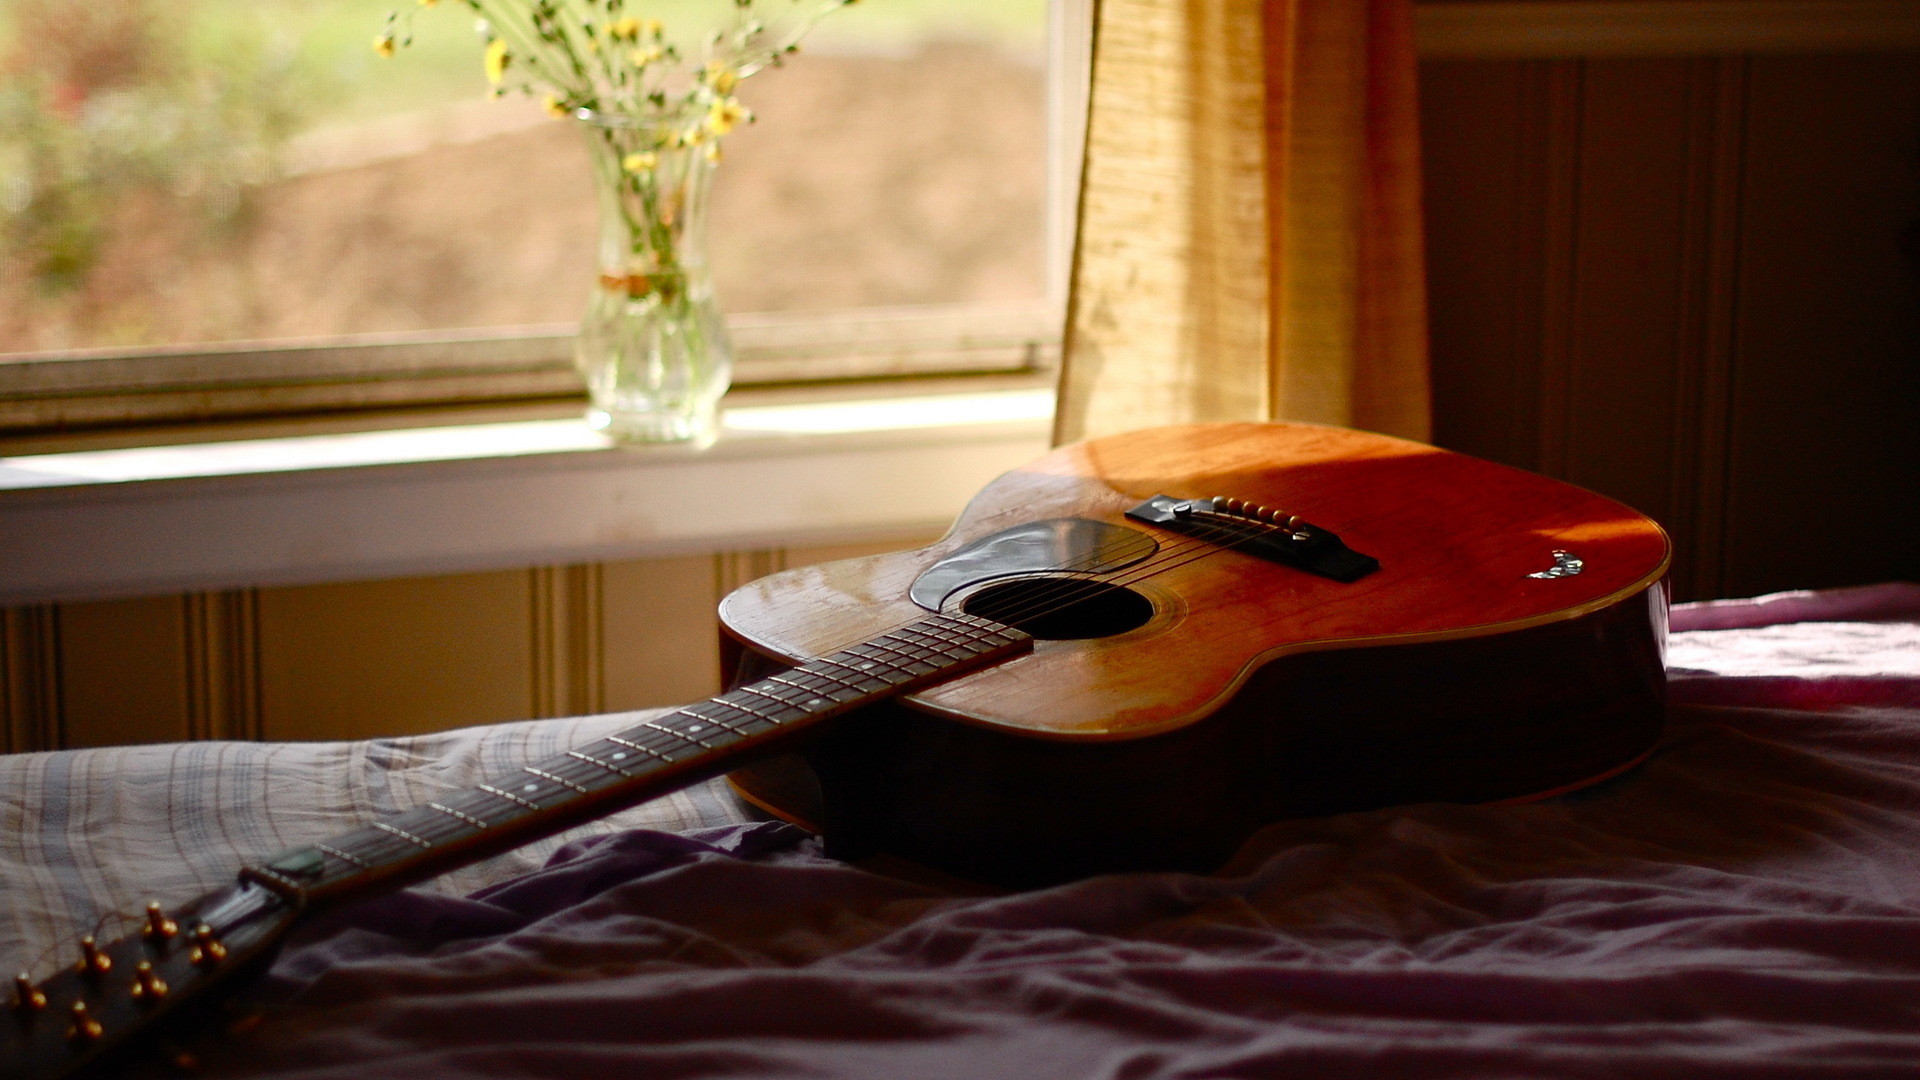 Acoustic Guitar – Wallpaper, High Definition, High Quality, Widescreen